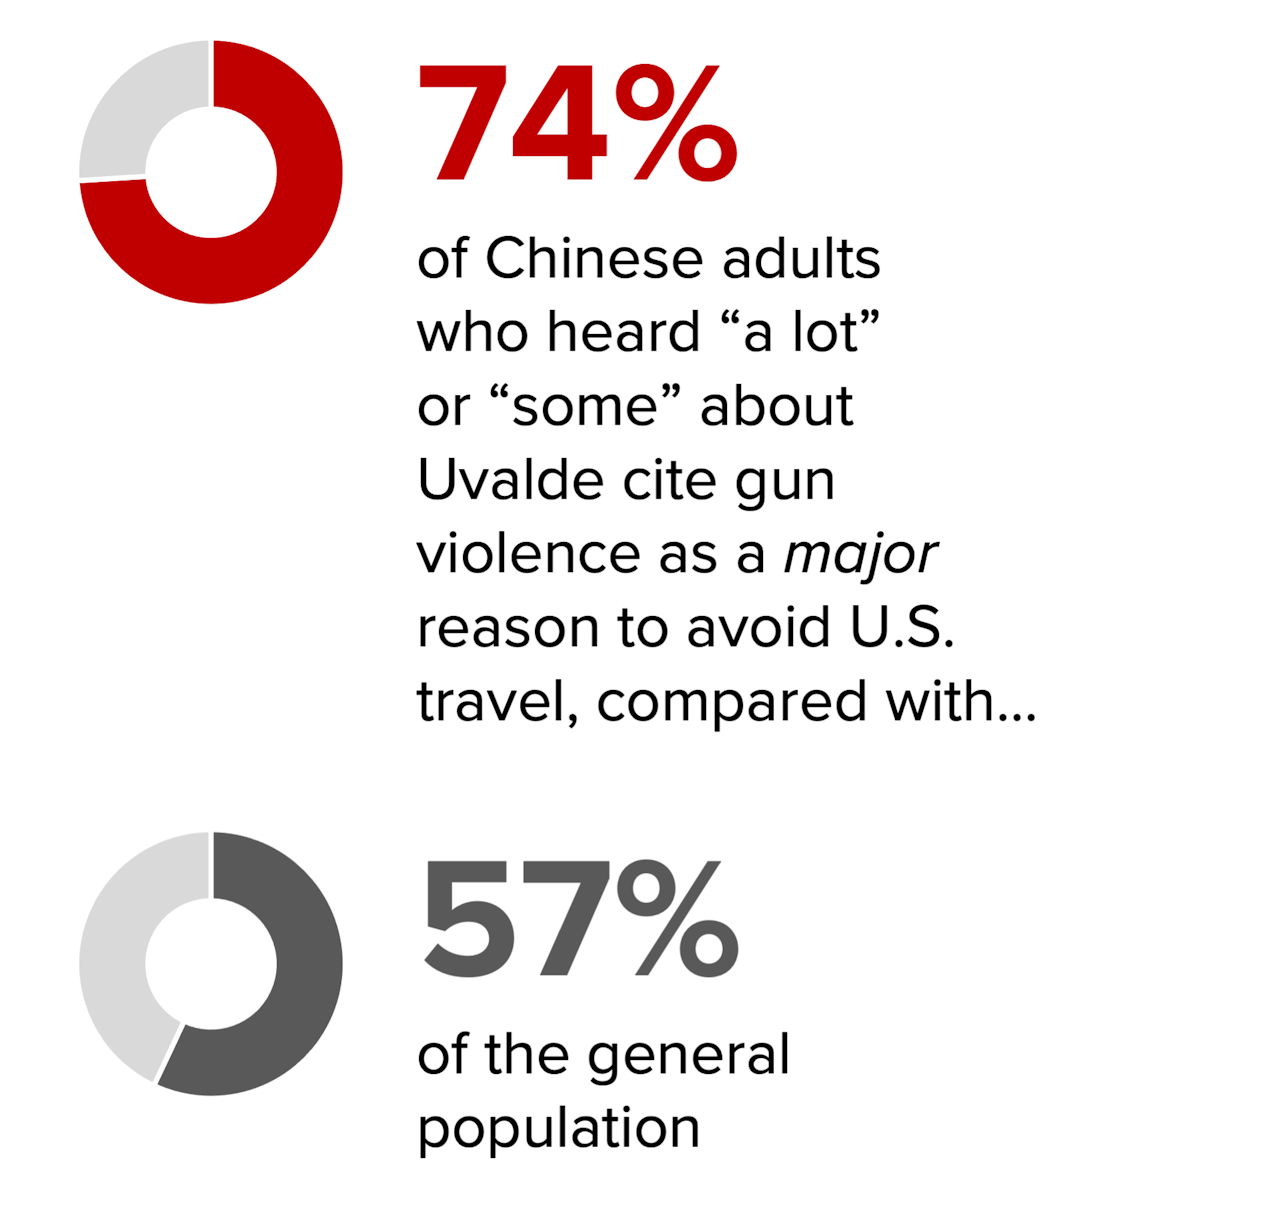 Infographic: 74% of Chinese adults who heard "a lot" or "some" about Uvalde cite gun violence as a major reason to avoid U.S. travel, compared with 54% of the general population